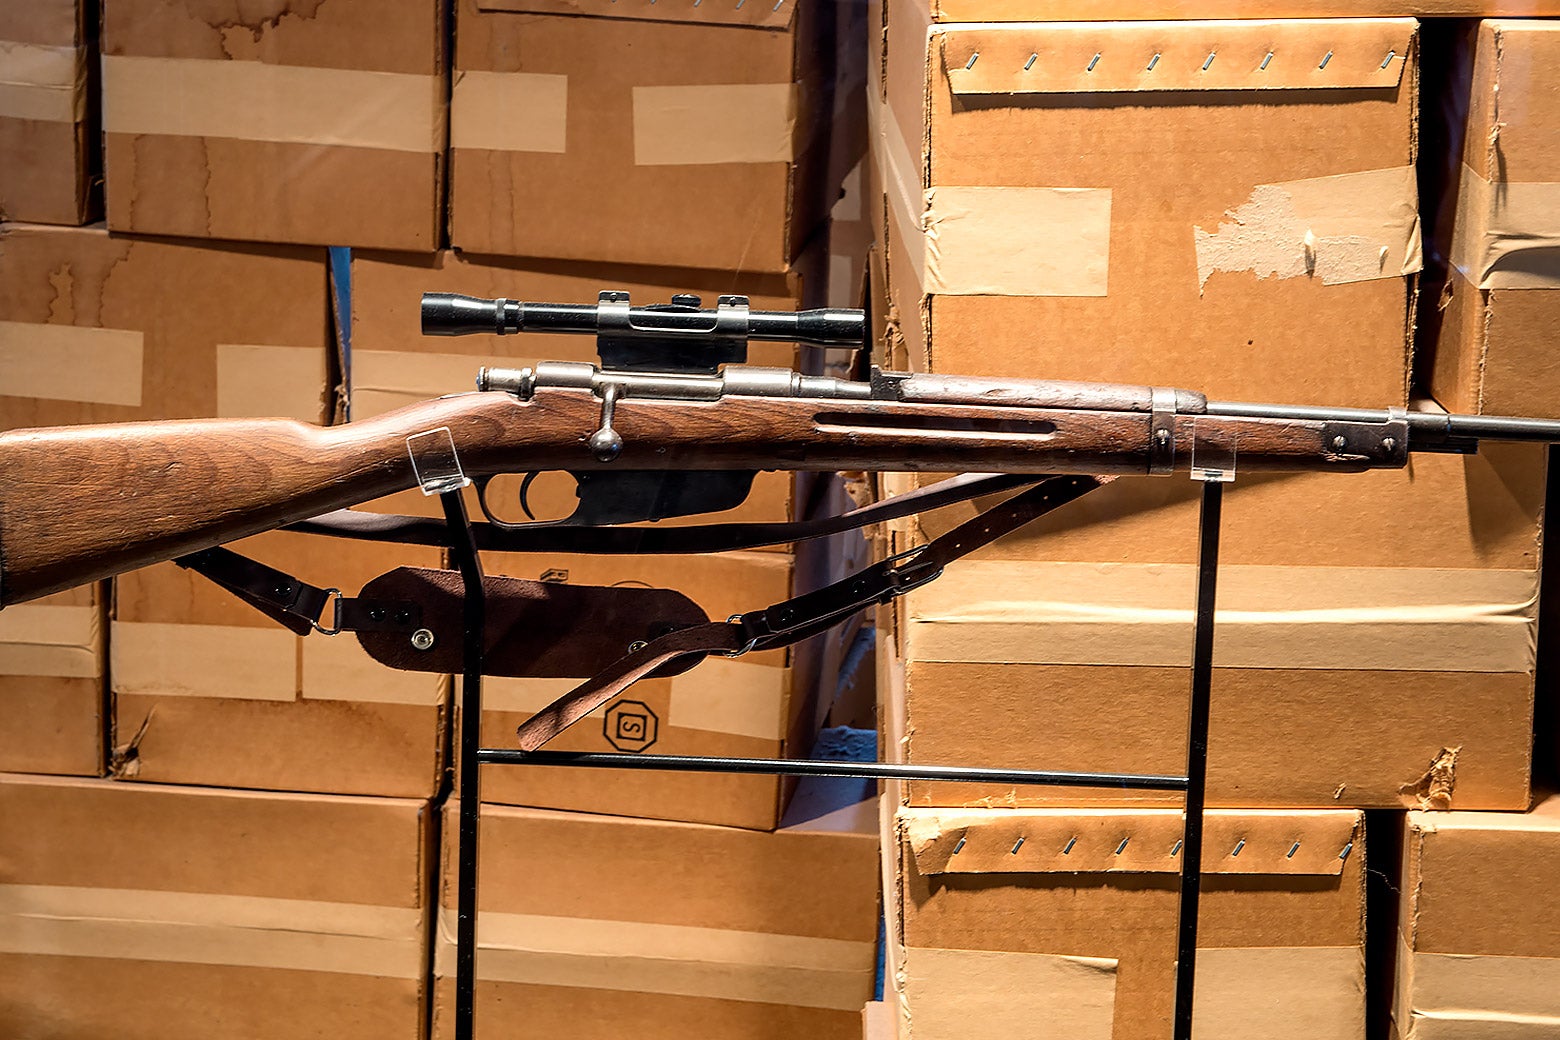 A wood-handled rifle with a shoulder strap and scope attached is seen before a wall of taped-up cardboard boxes. 